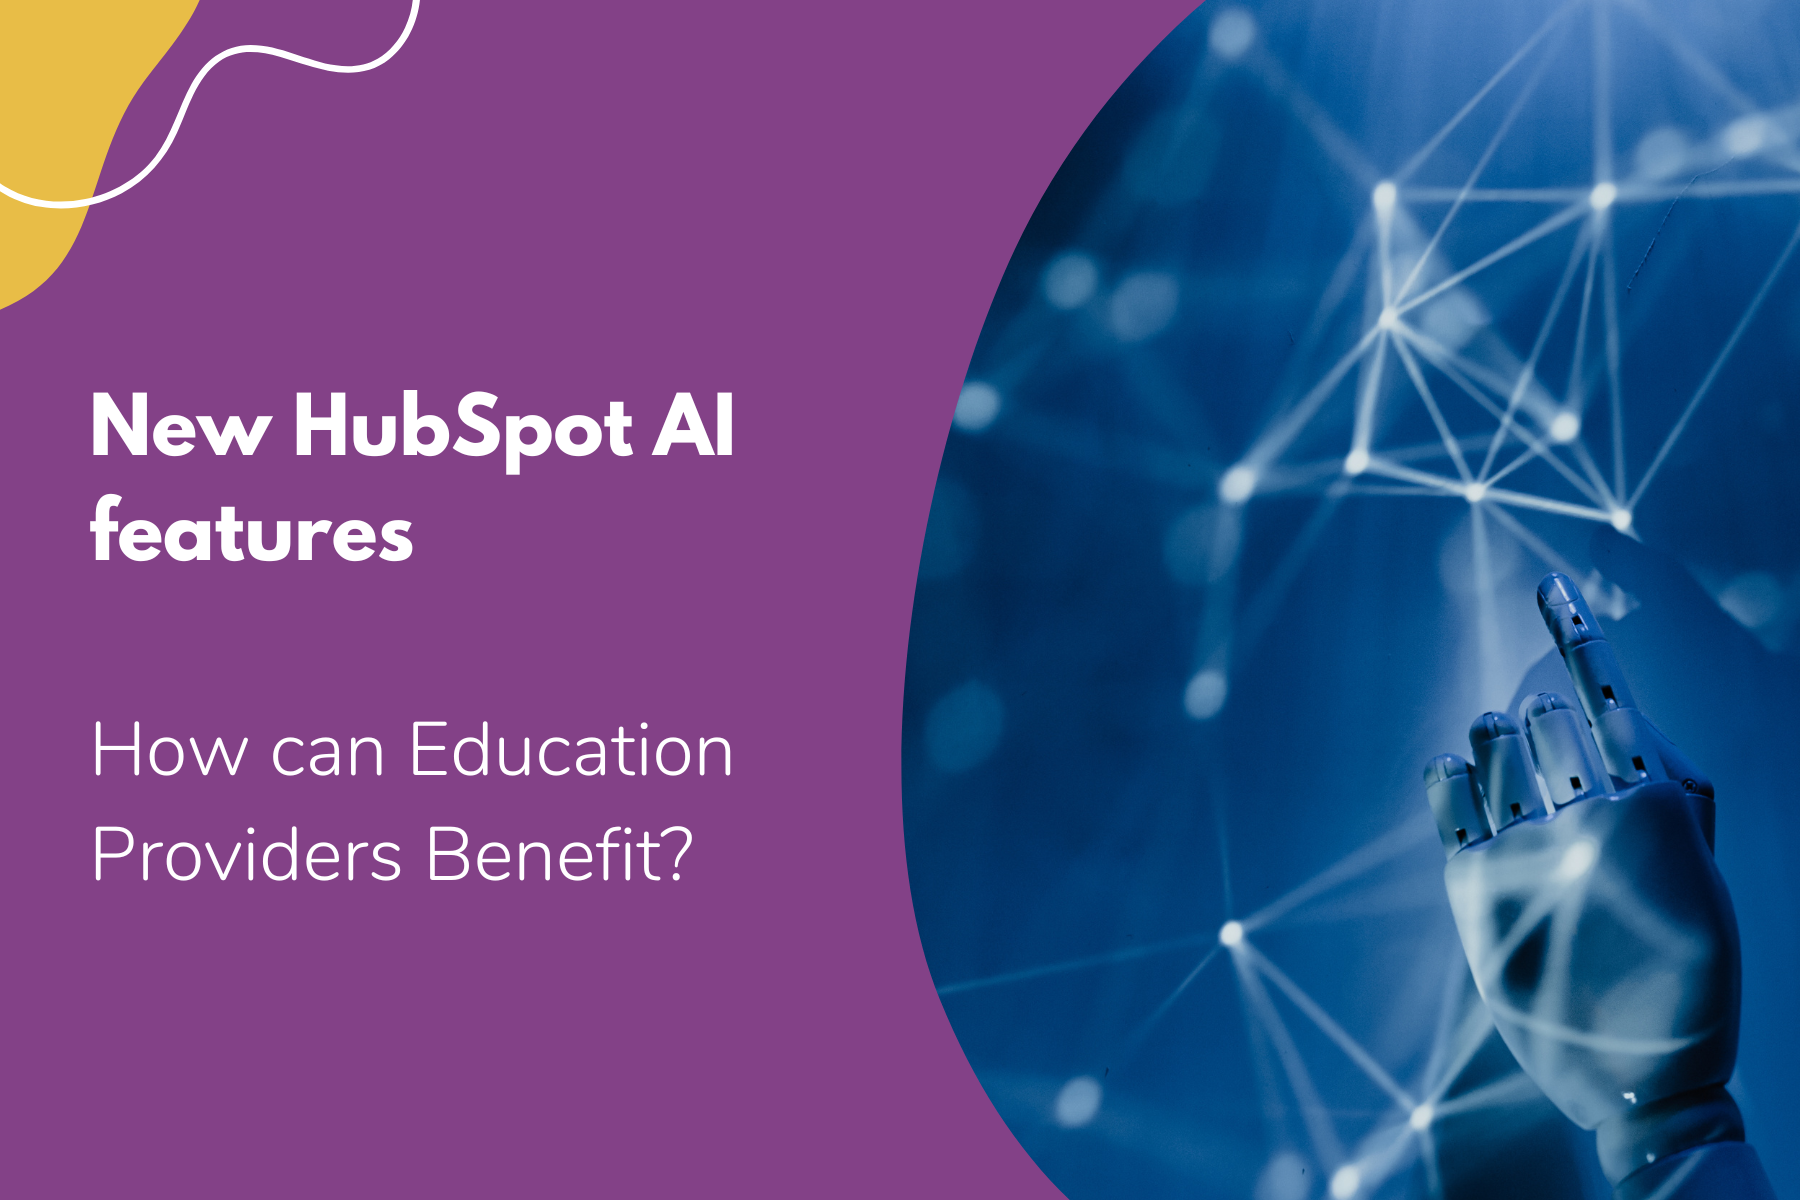 HubSpot AI features for education